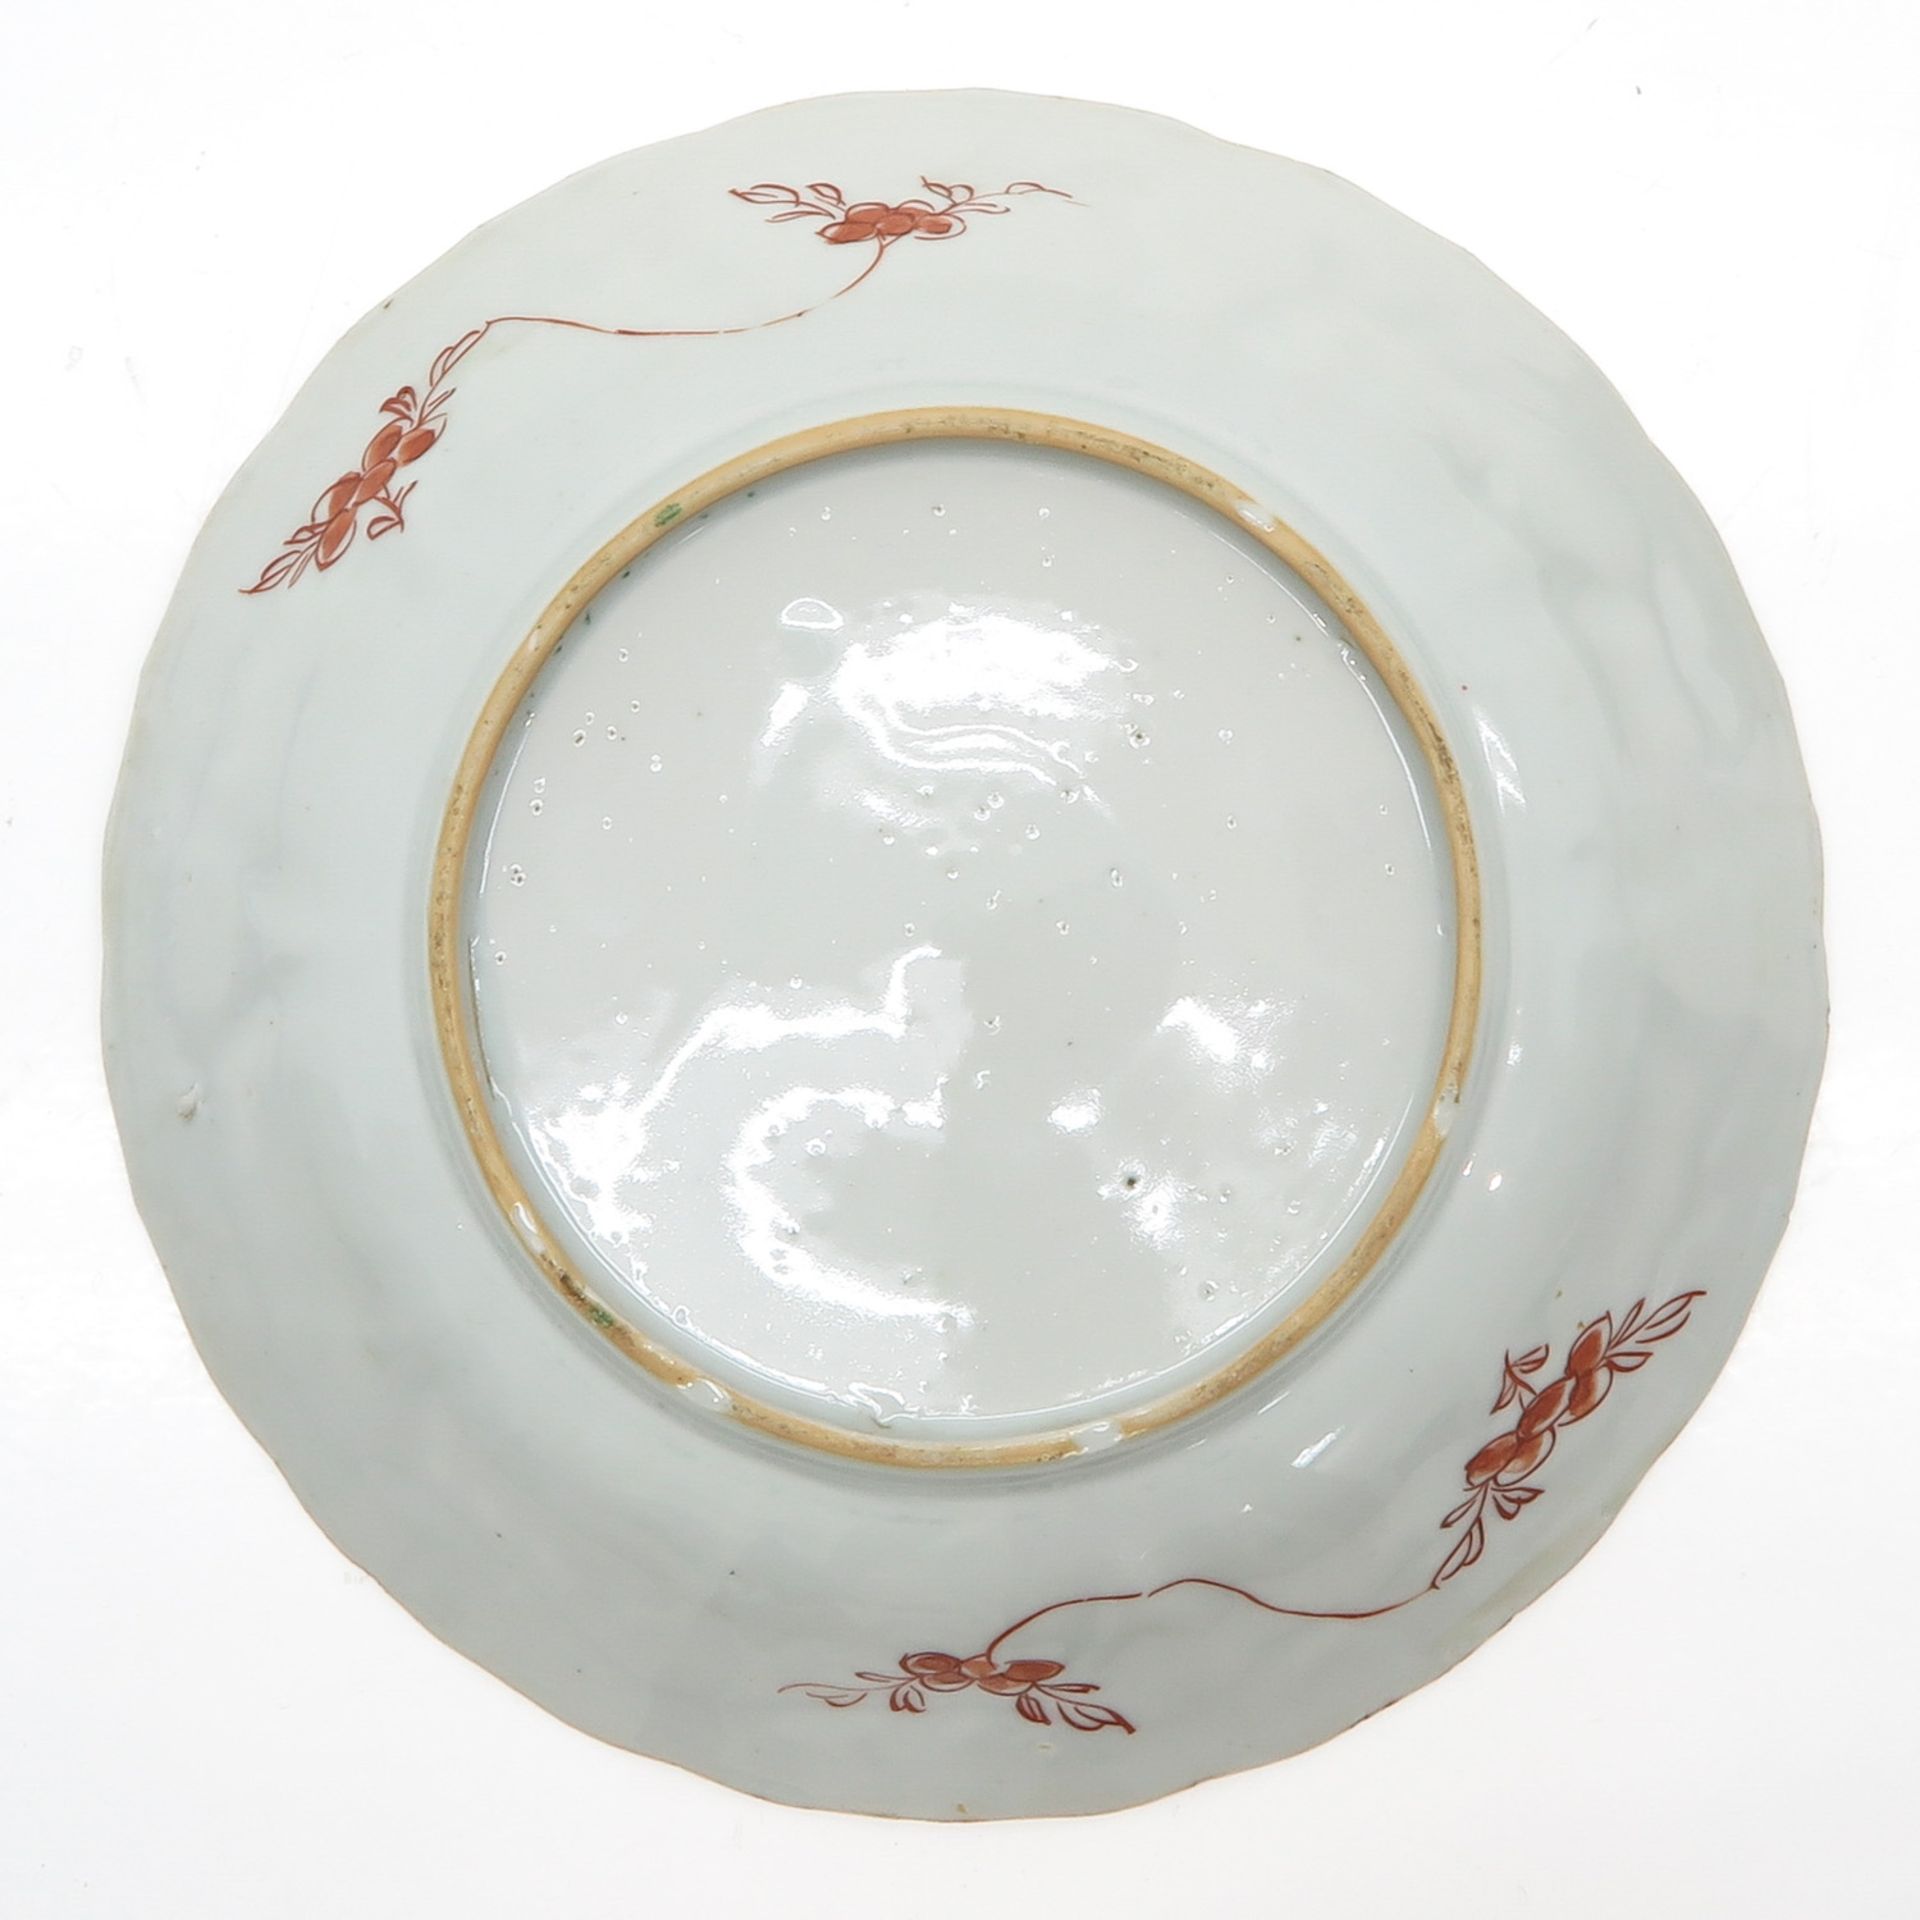 18th Century China Porcelain Plate - Image 2 of 2